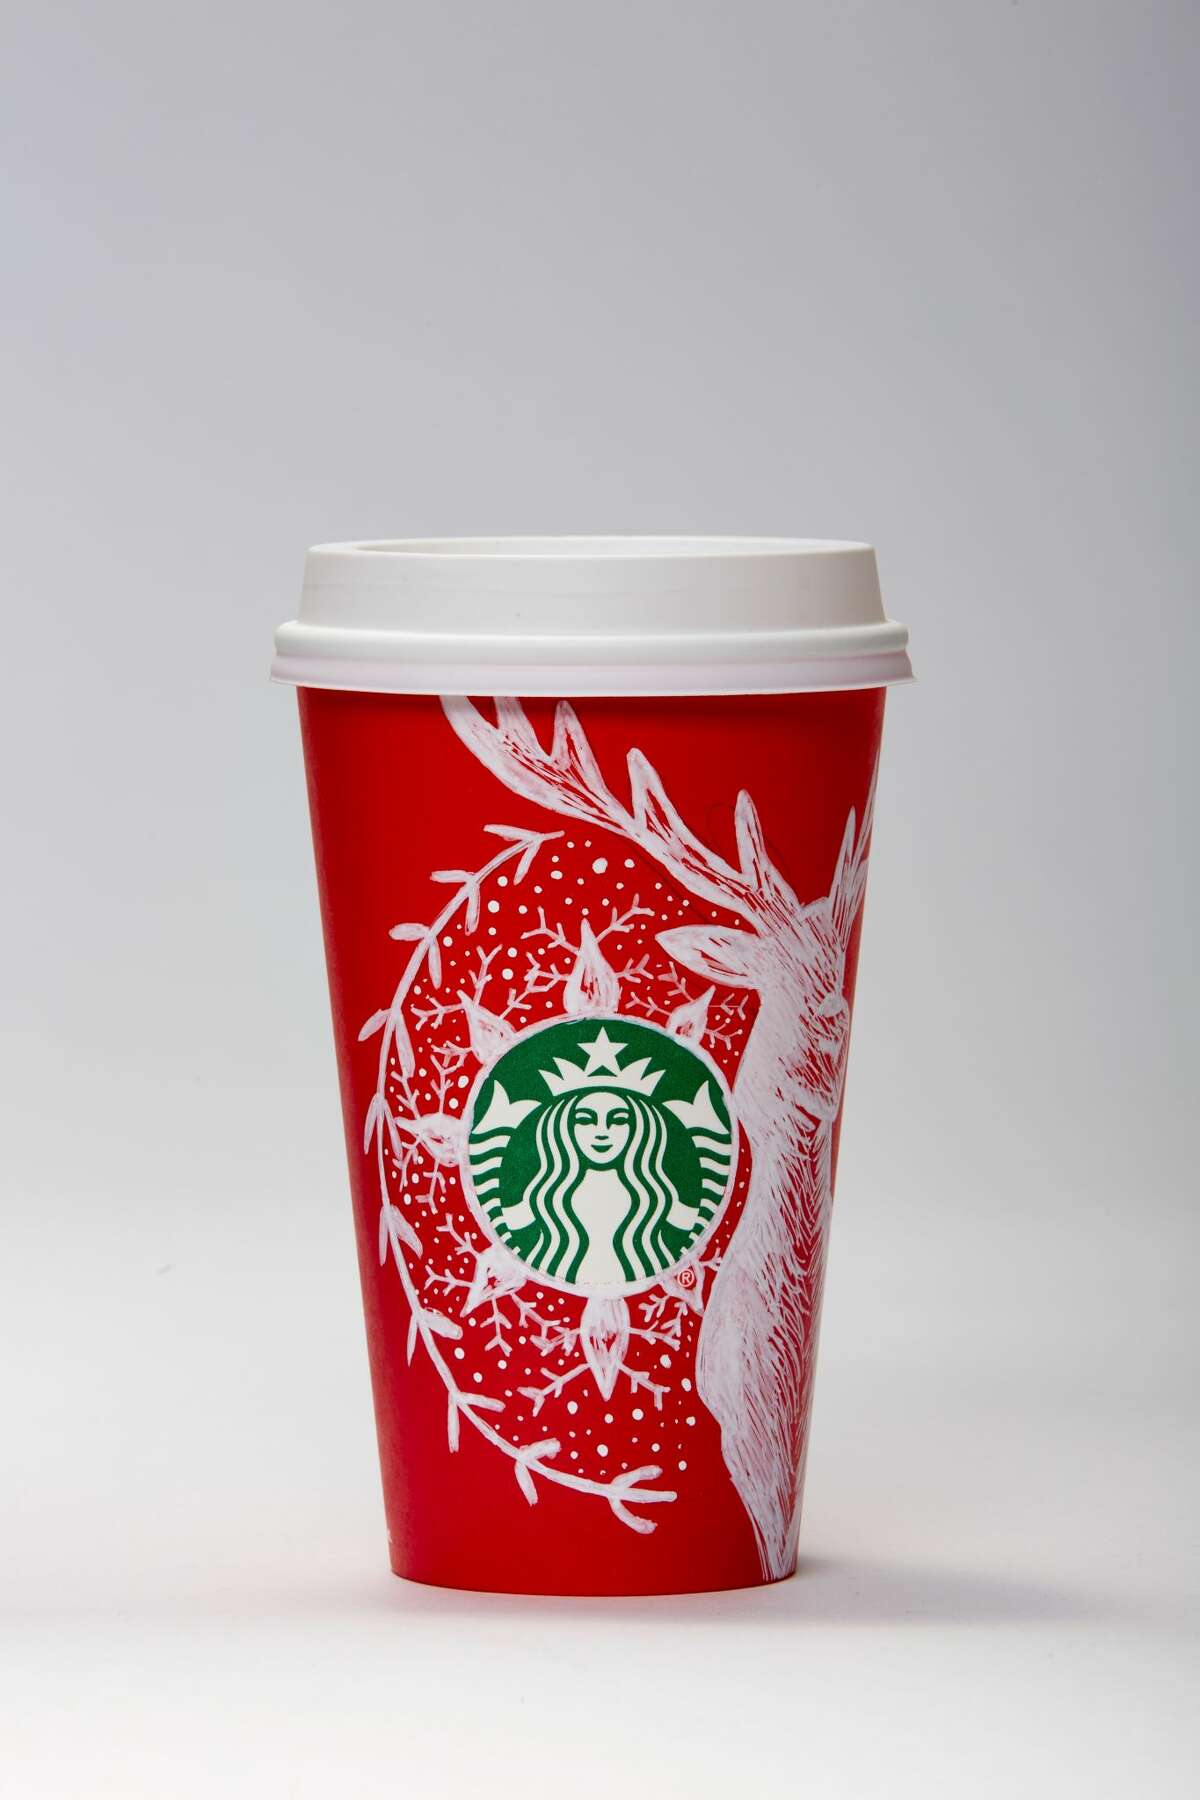 Starbucks' red cups are back. All 13 designs were drawn by customers. 